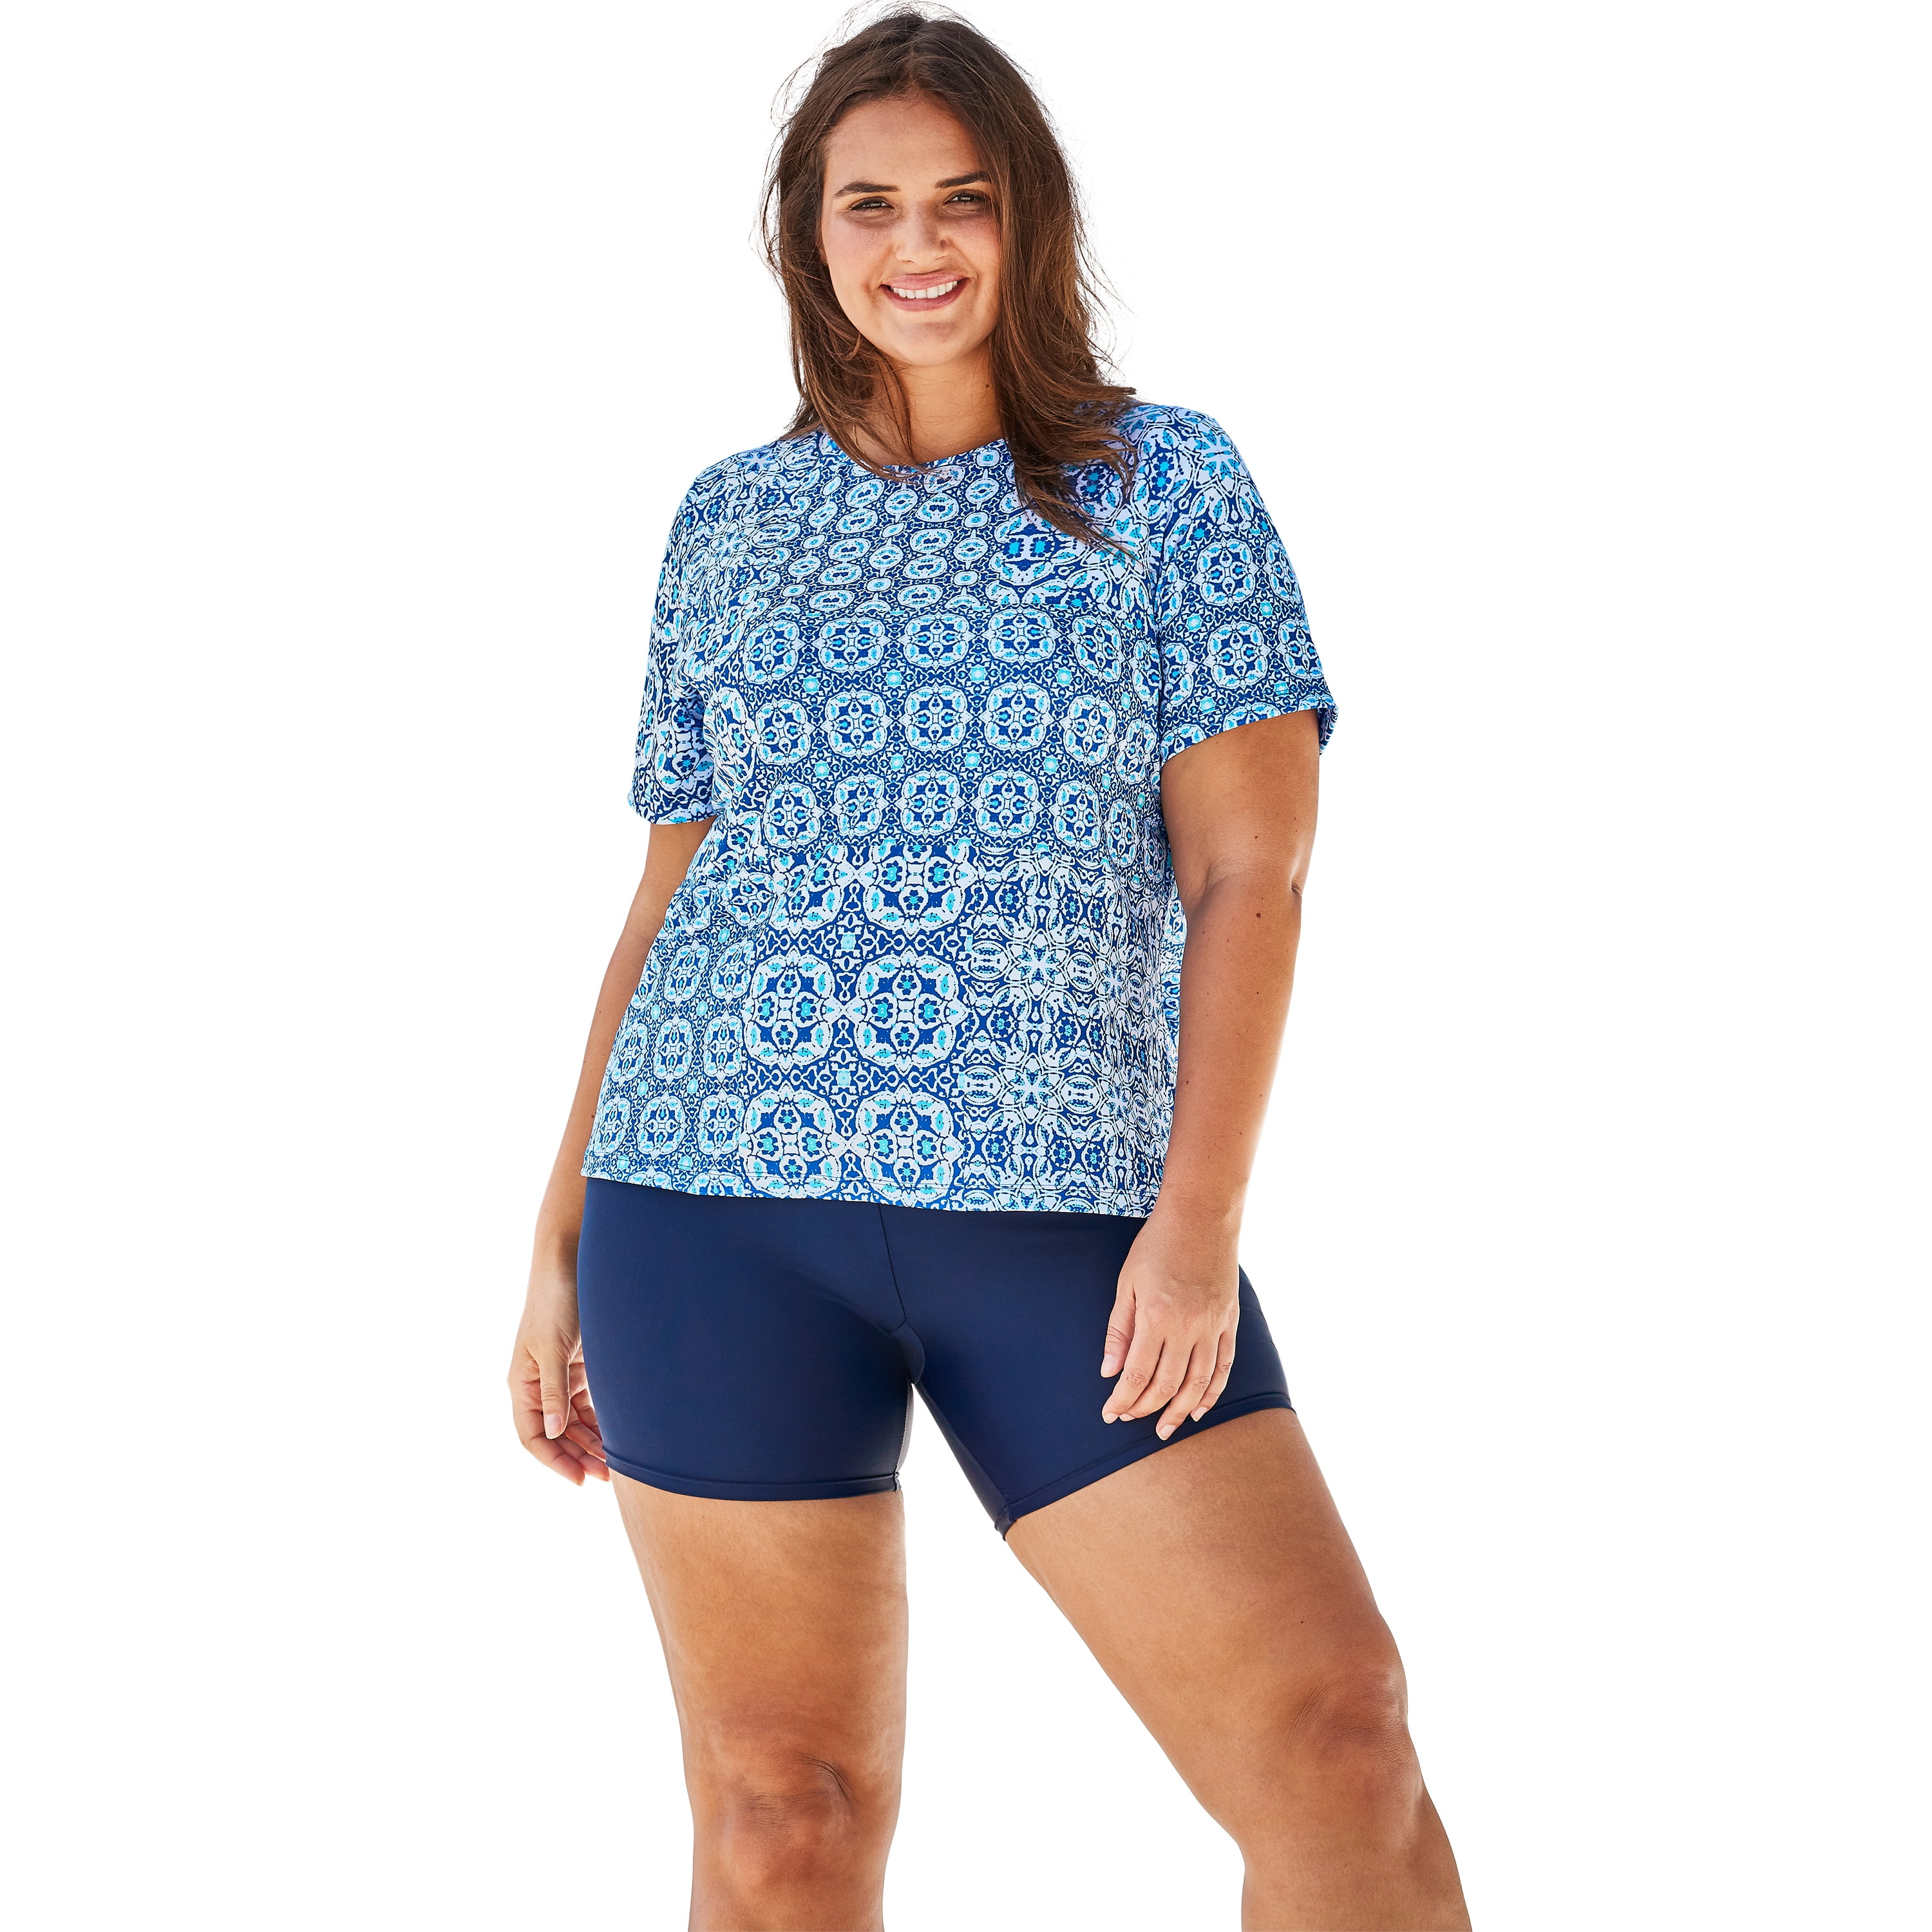 Swimsuitsforall - Swimsuits For All Women's Plus Size The Swim Tee ...